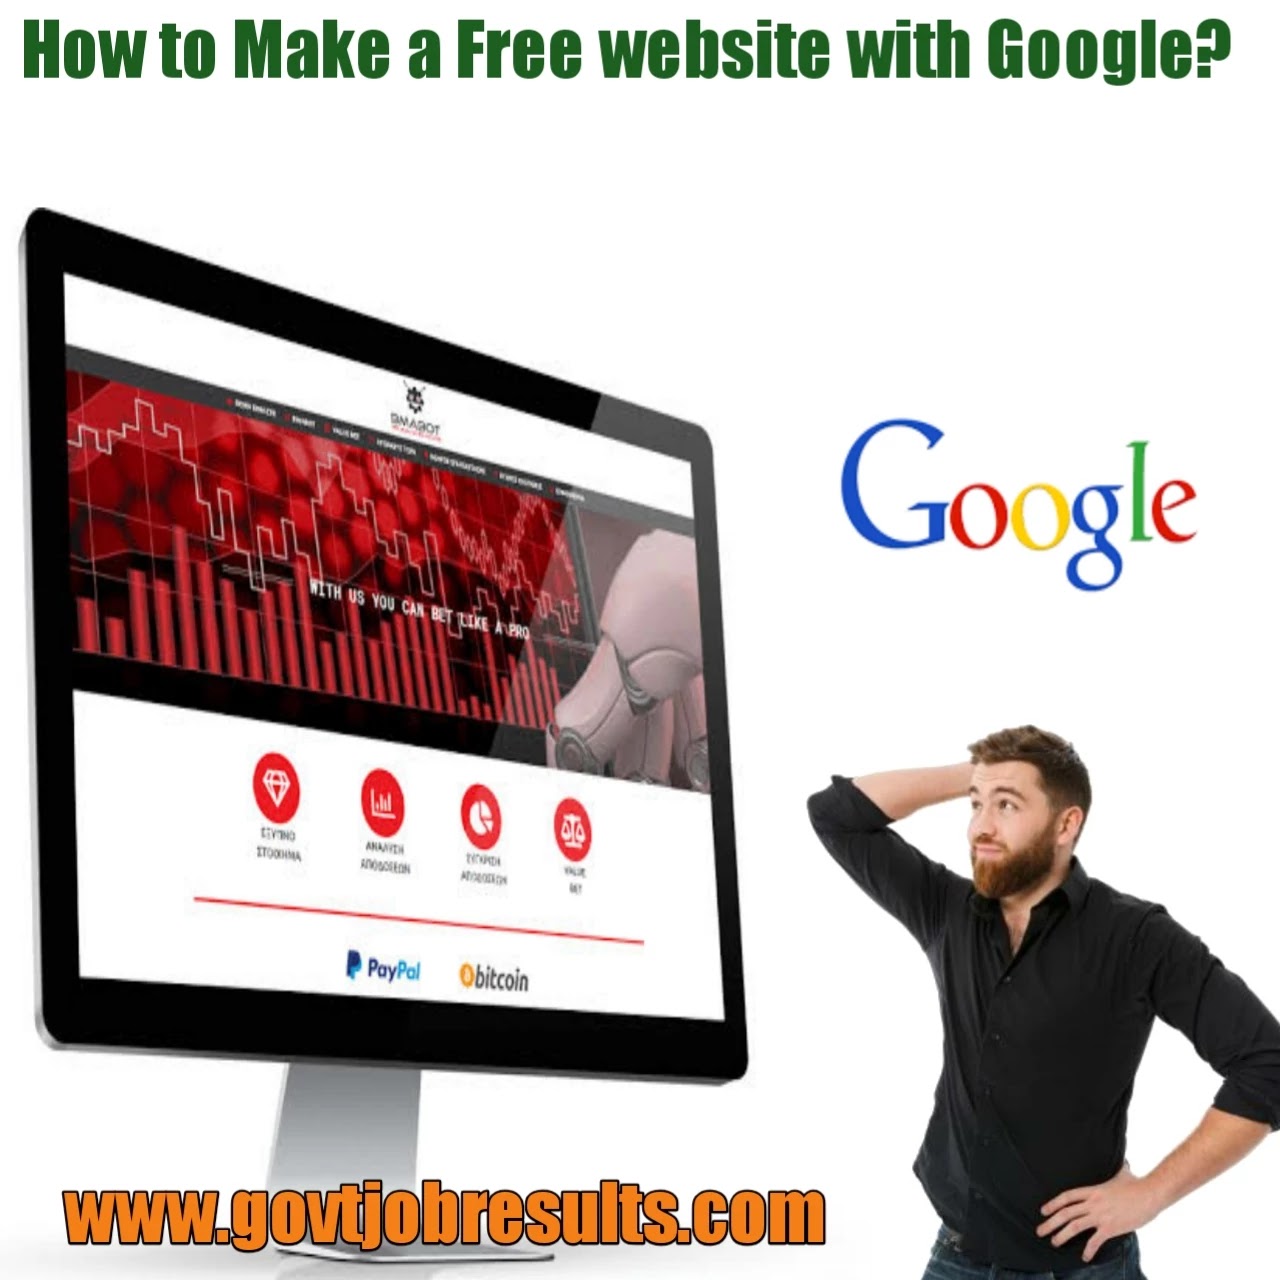 How to make a free website on Google